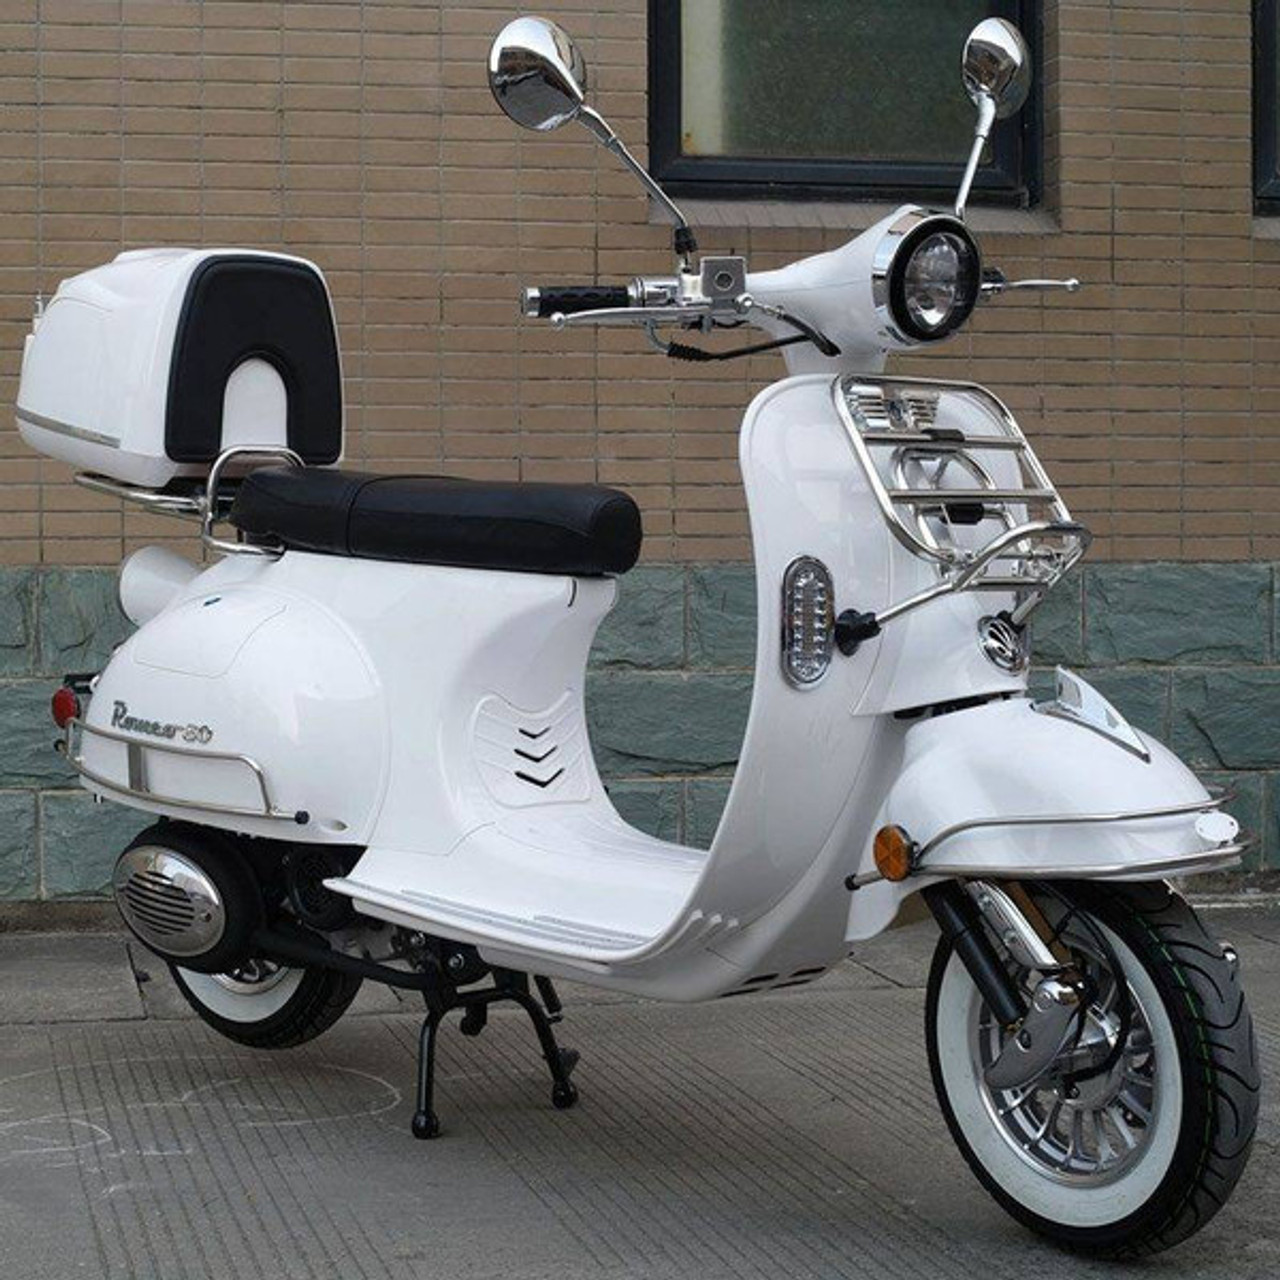 DongFang Romeo 50 (ROMEO-50-WT) Gas Scooter, Retro Style Body, Slick Design, Fully Automatic